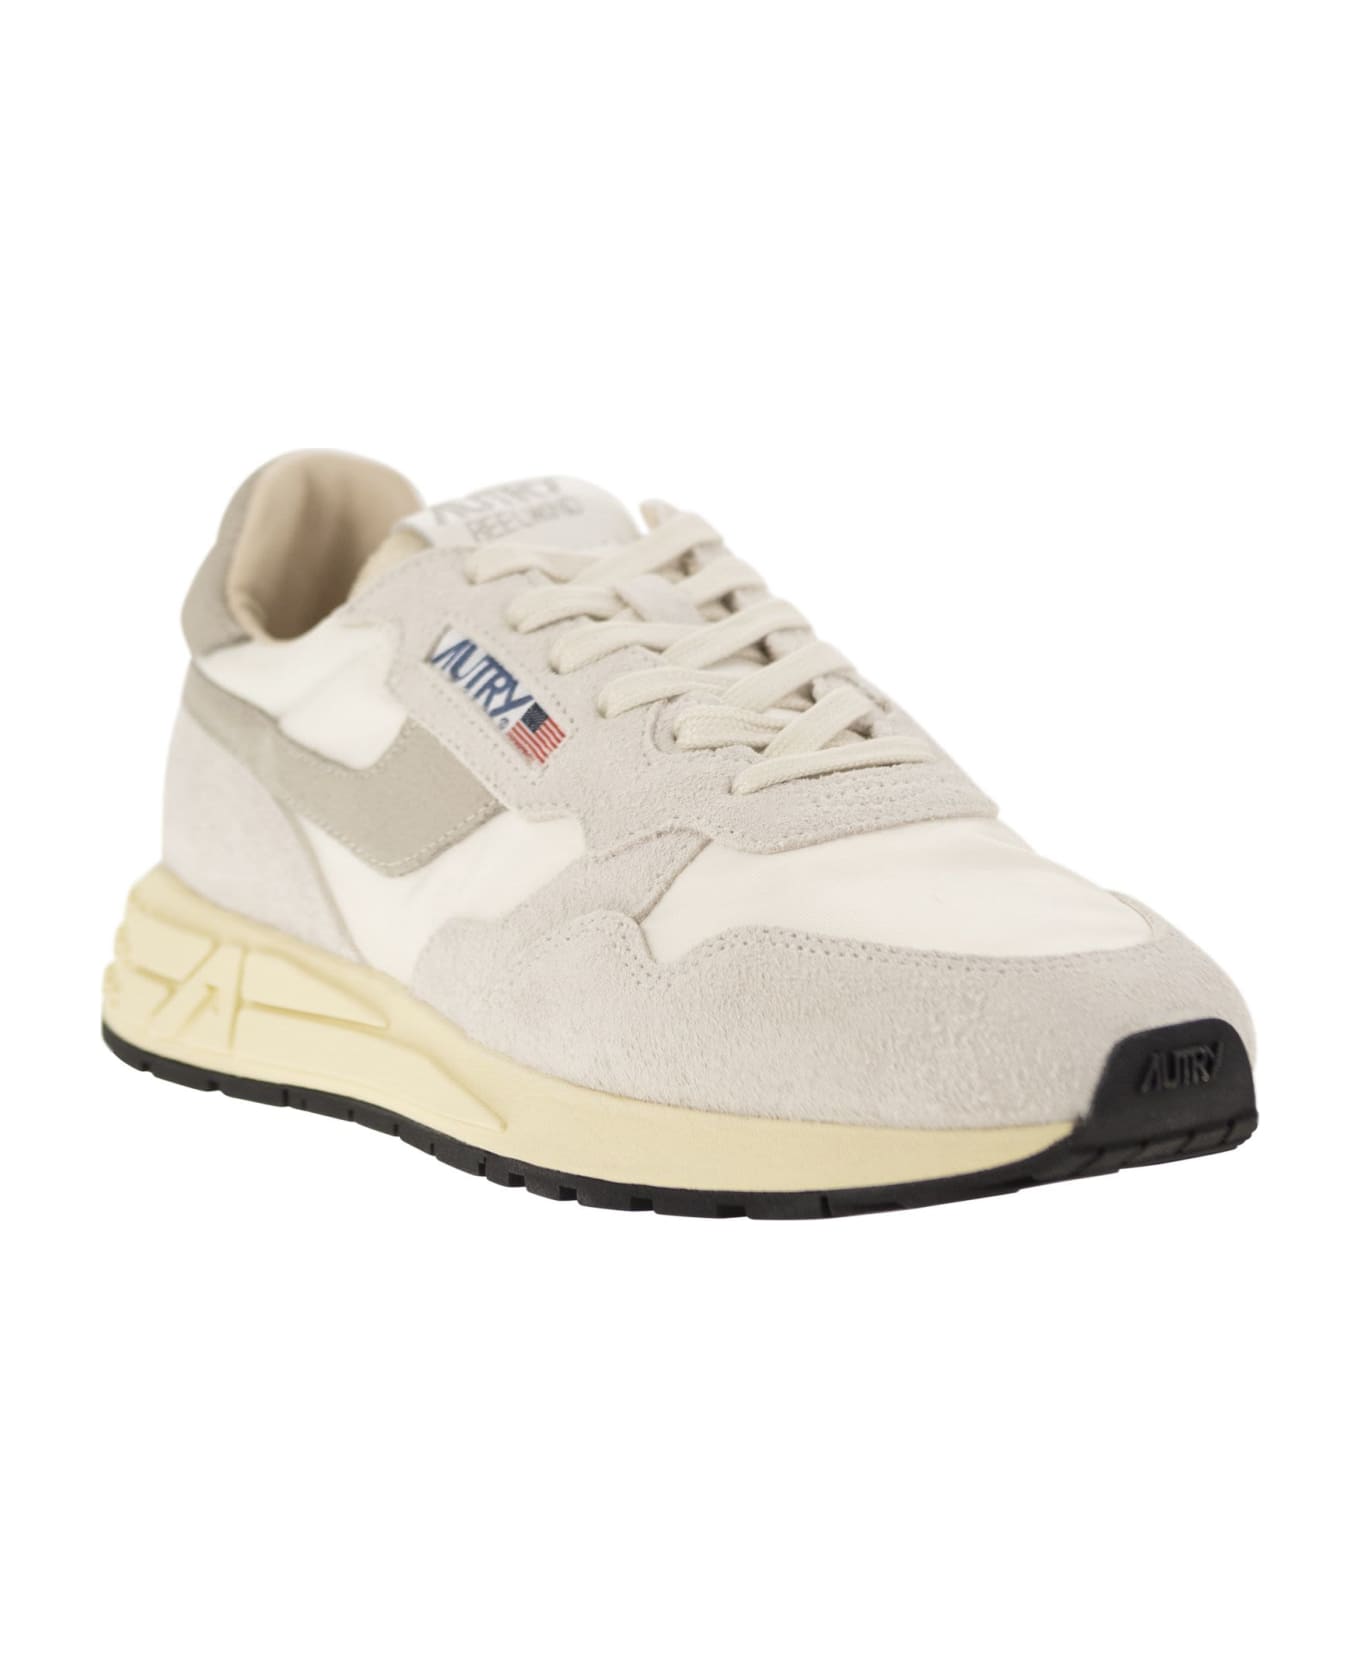 Autry Reelwind - Suede And Technical Textile Trainer - White